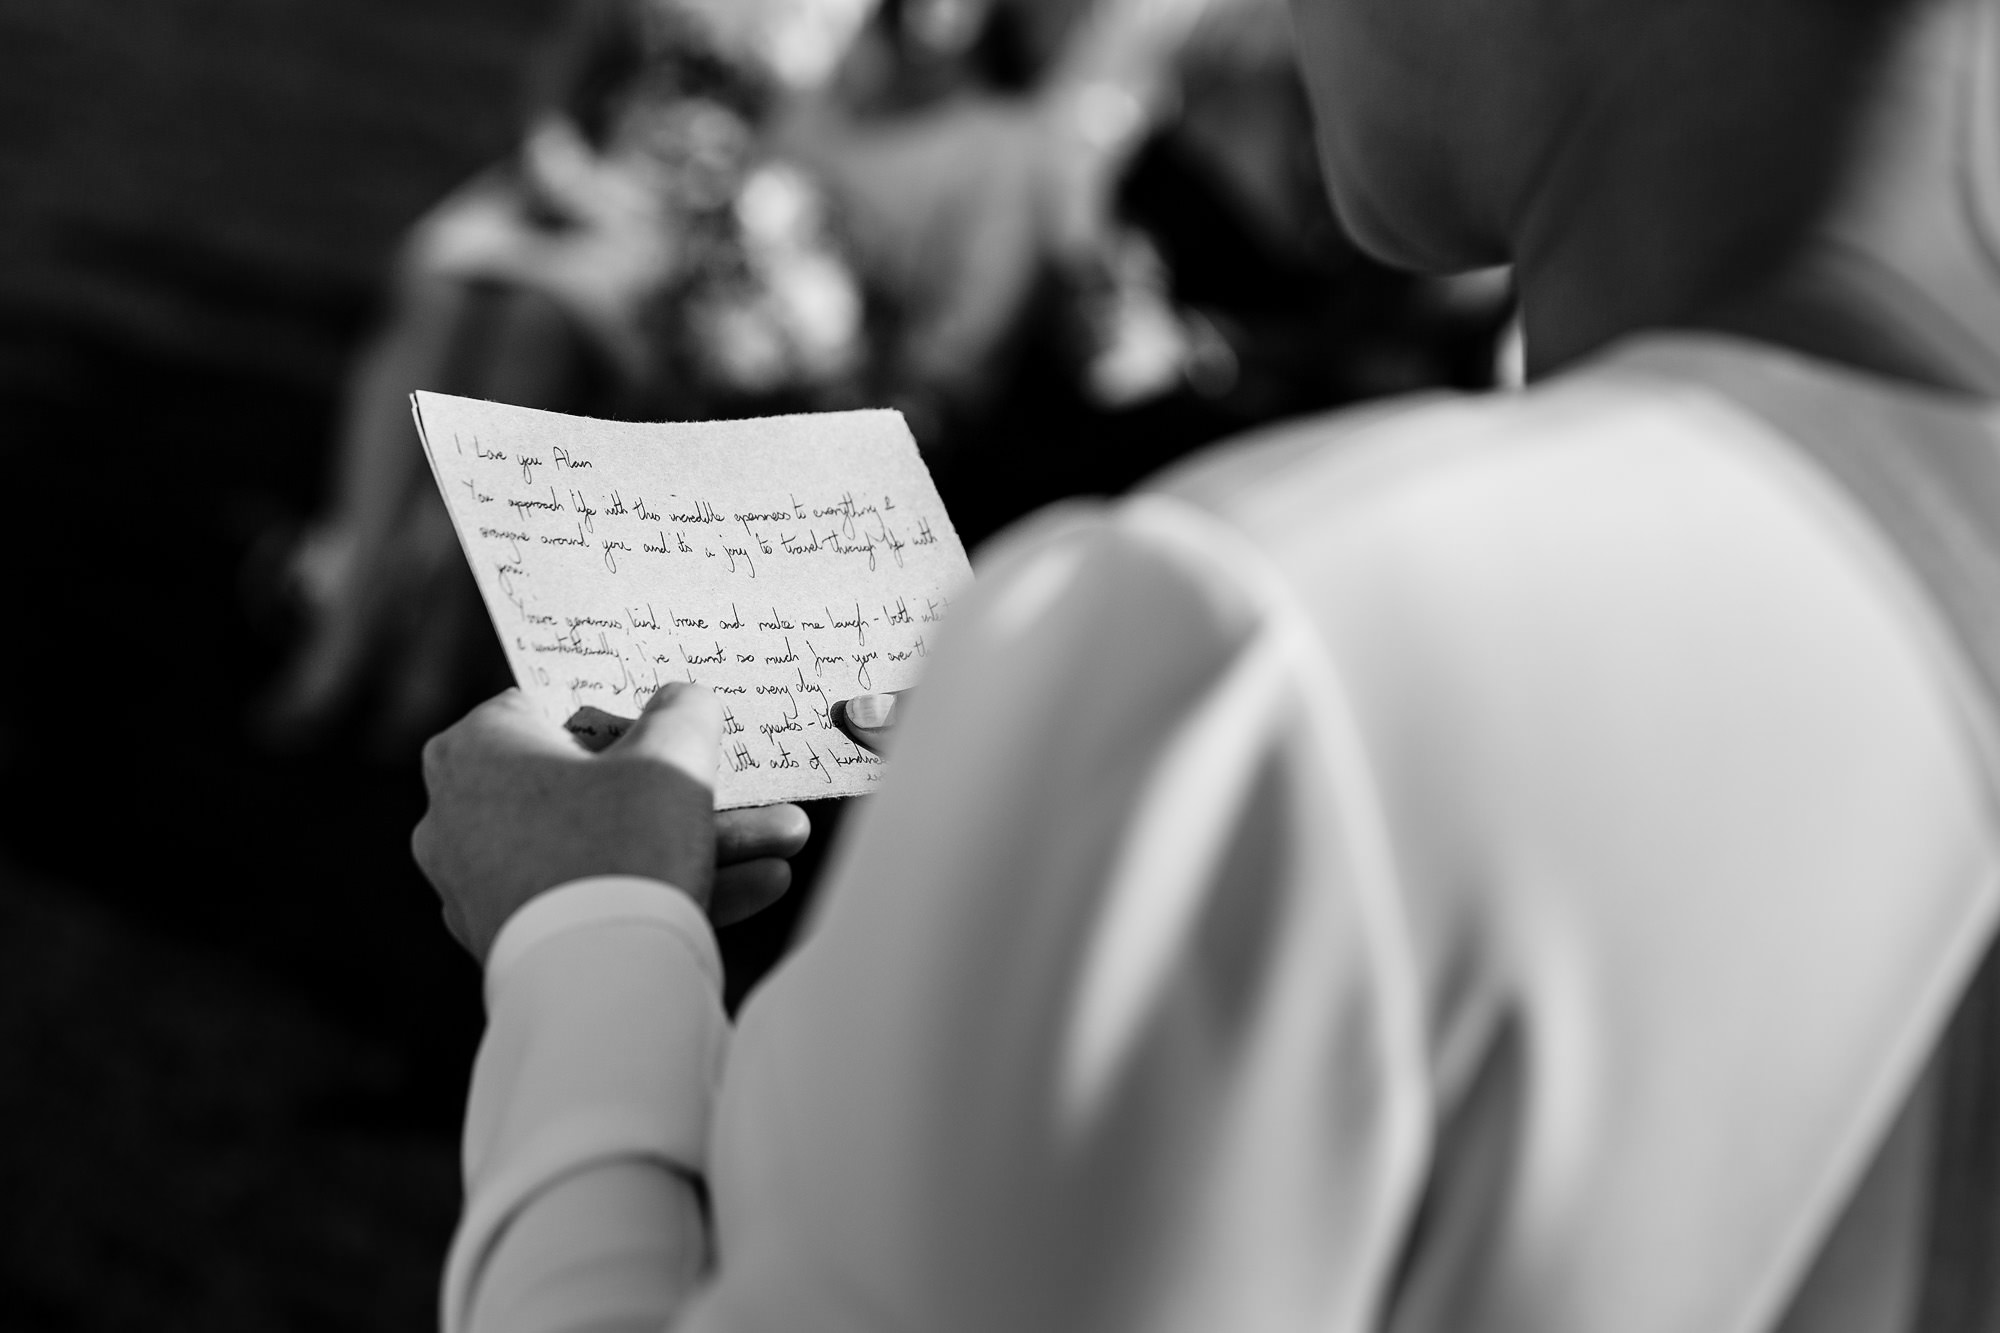 The bride's vows written out in beautiful handwriting.